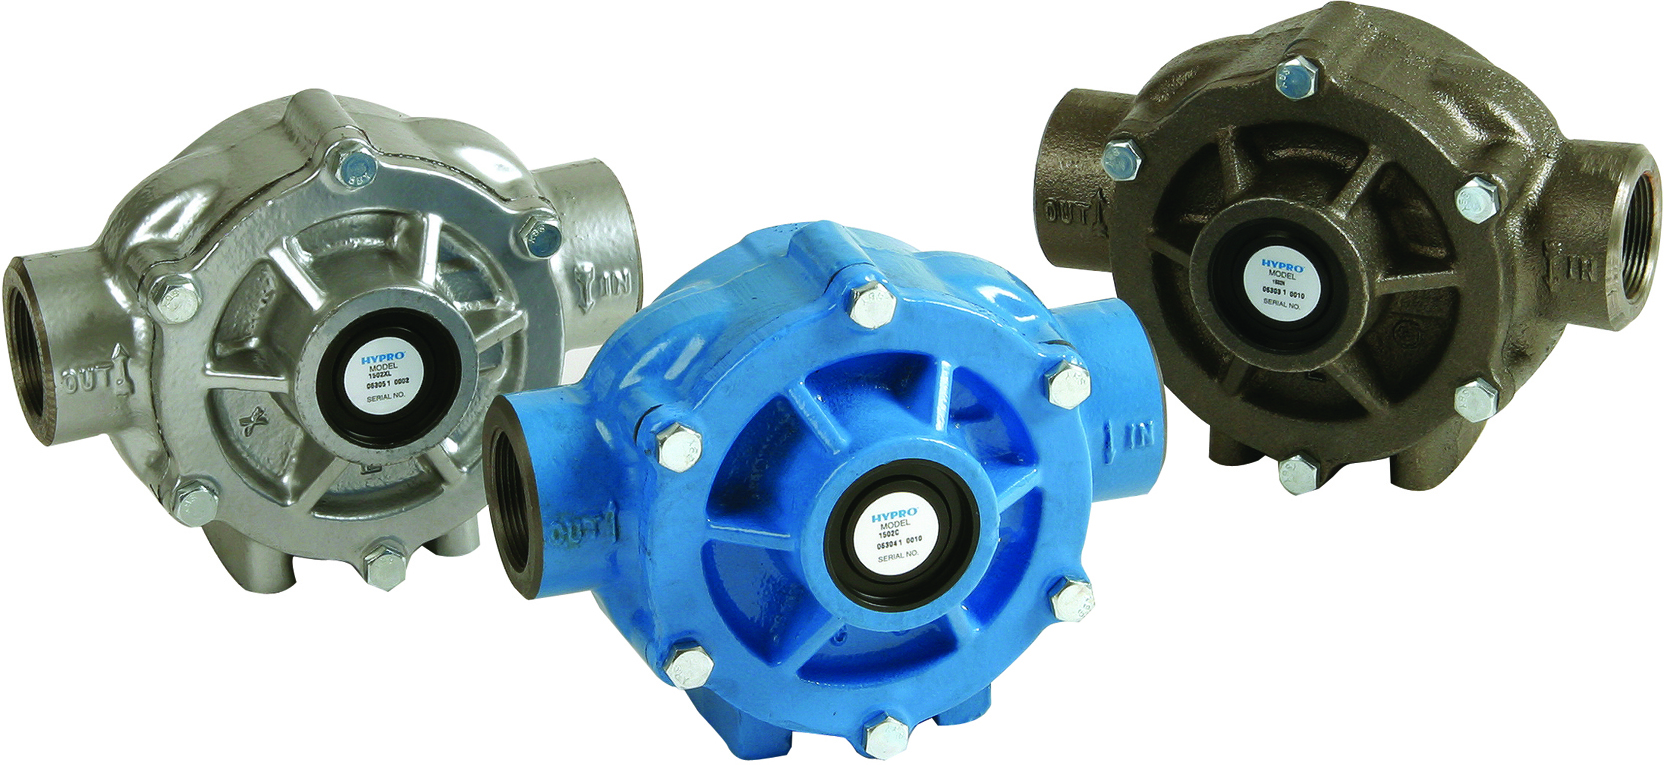 Hypro 1502 Series - 6 Roller, Cast Iron, Ni-Resist or Silver Series XL Roller Pumps